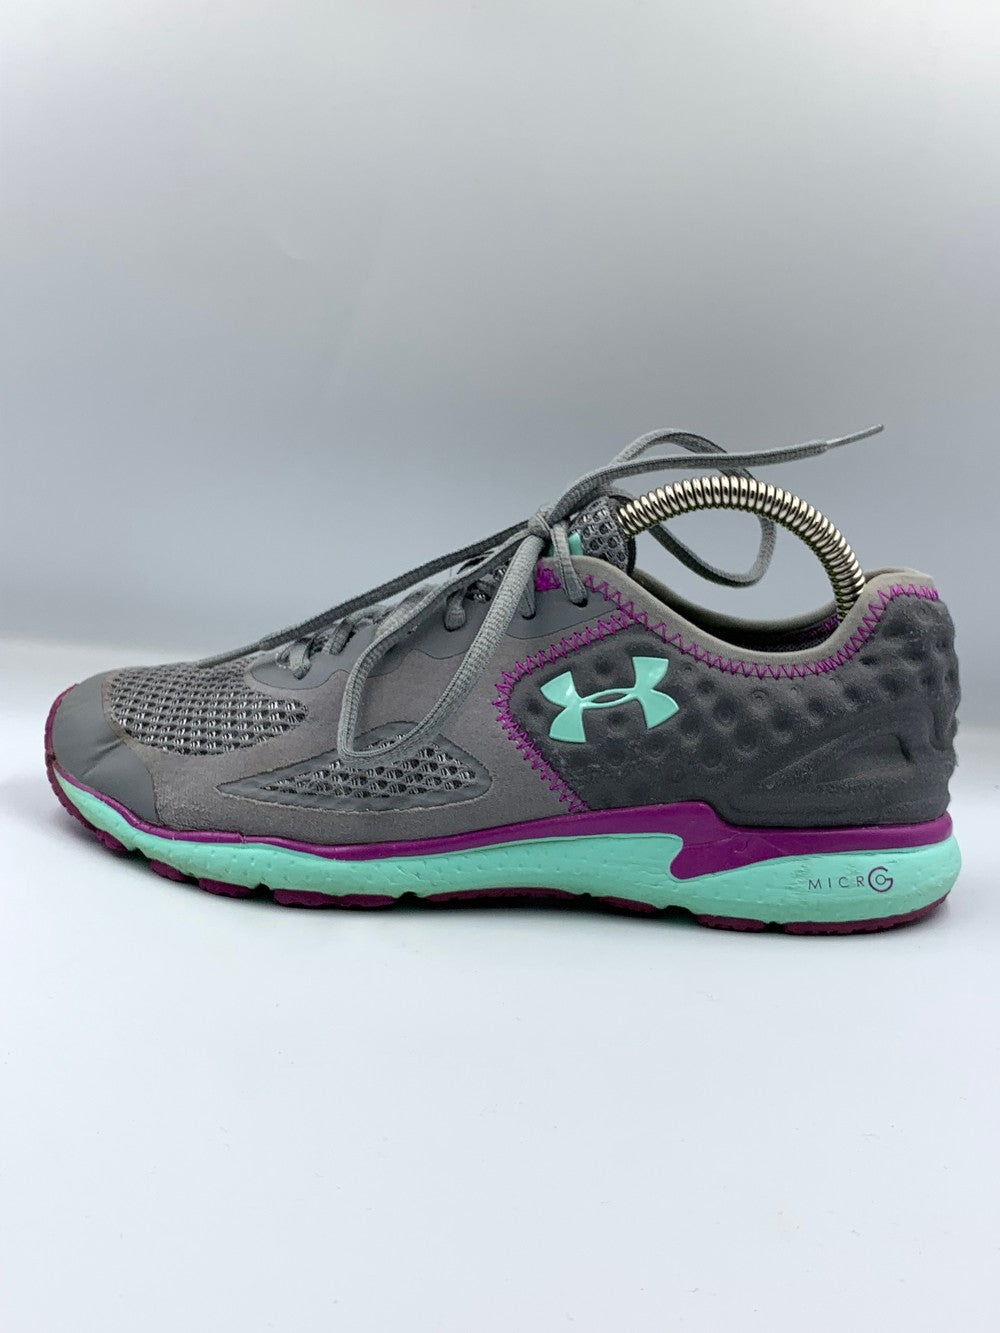 Under Armour Micrg Original Brand Sports Gray Running For Women Shoes